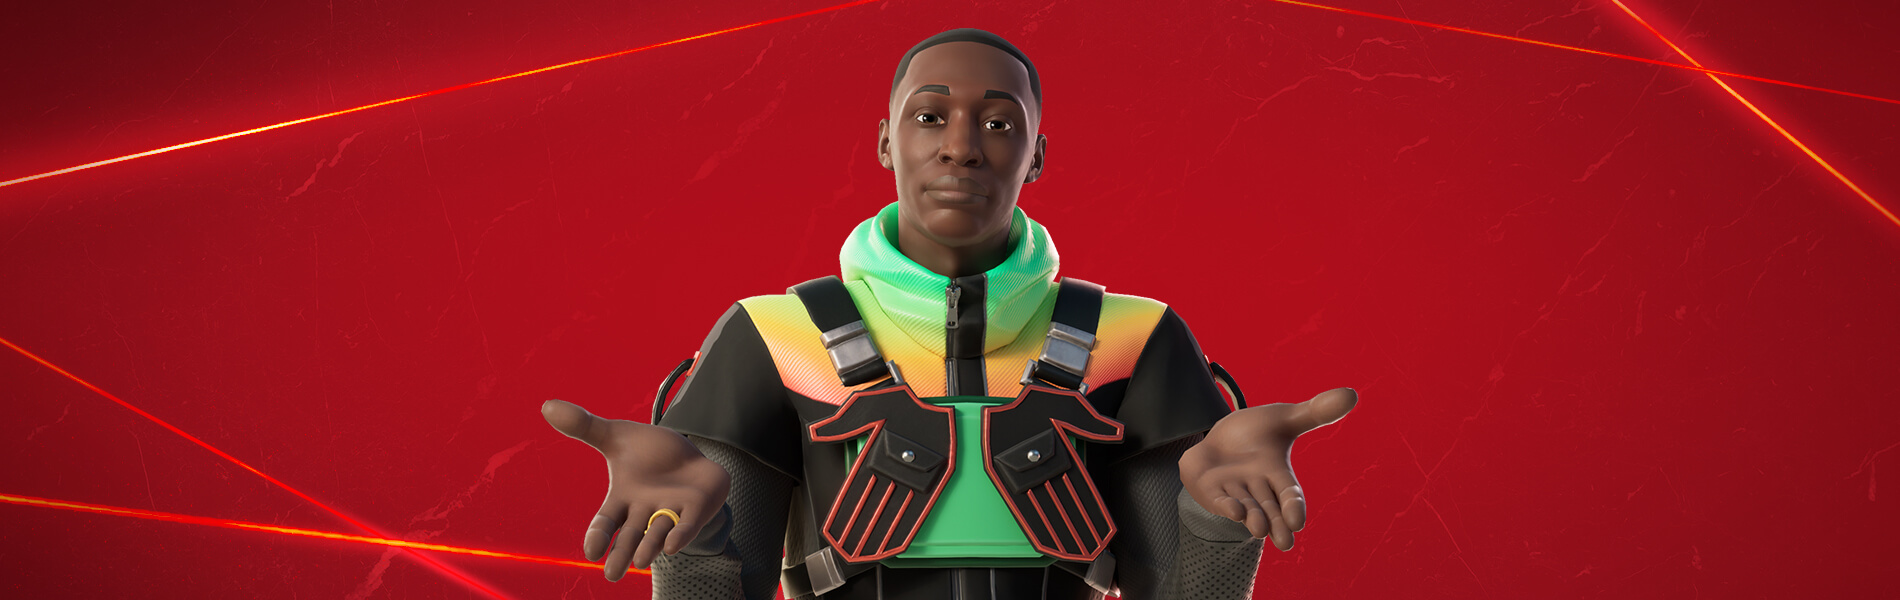 fortnite-khaby-lame-outfit-1900x600-7cab39f74e79